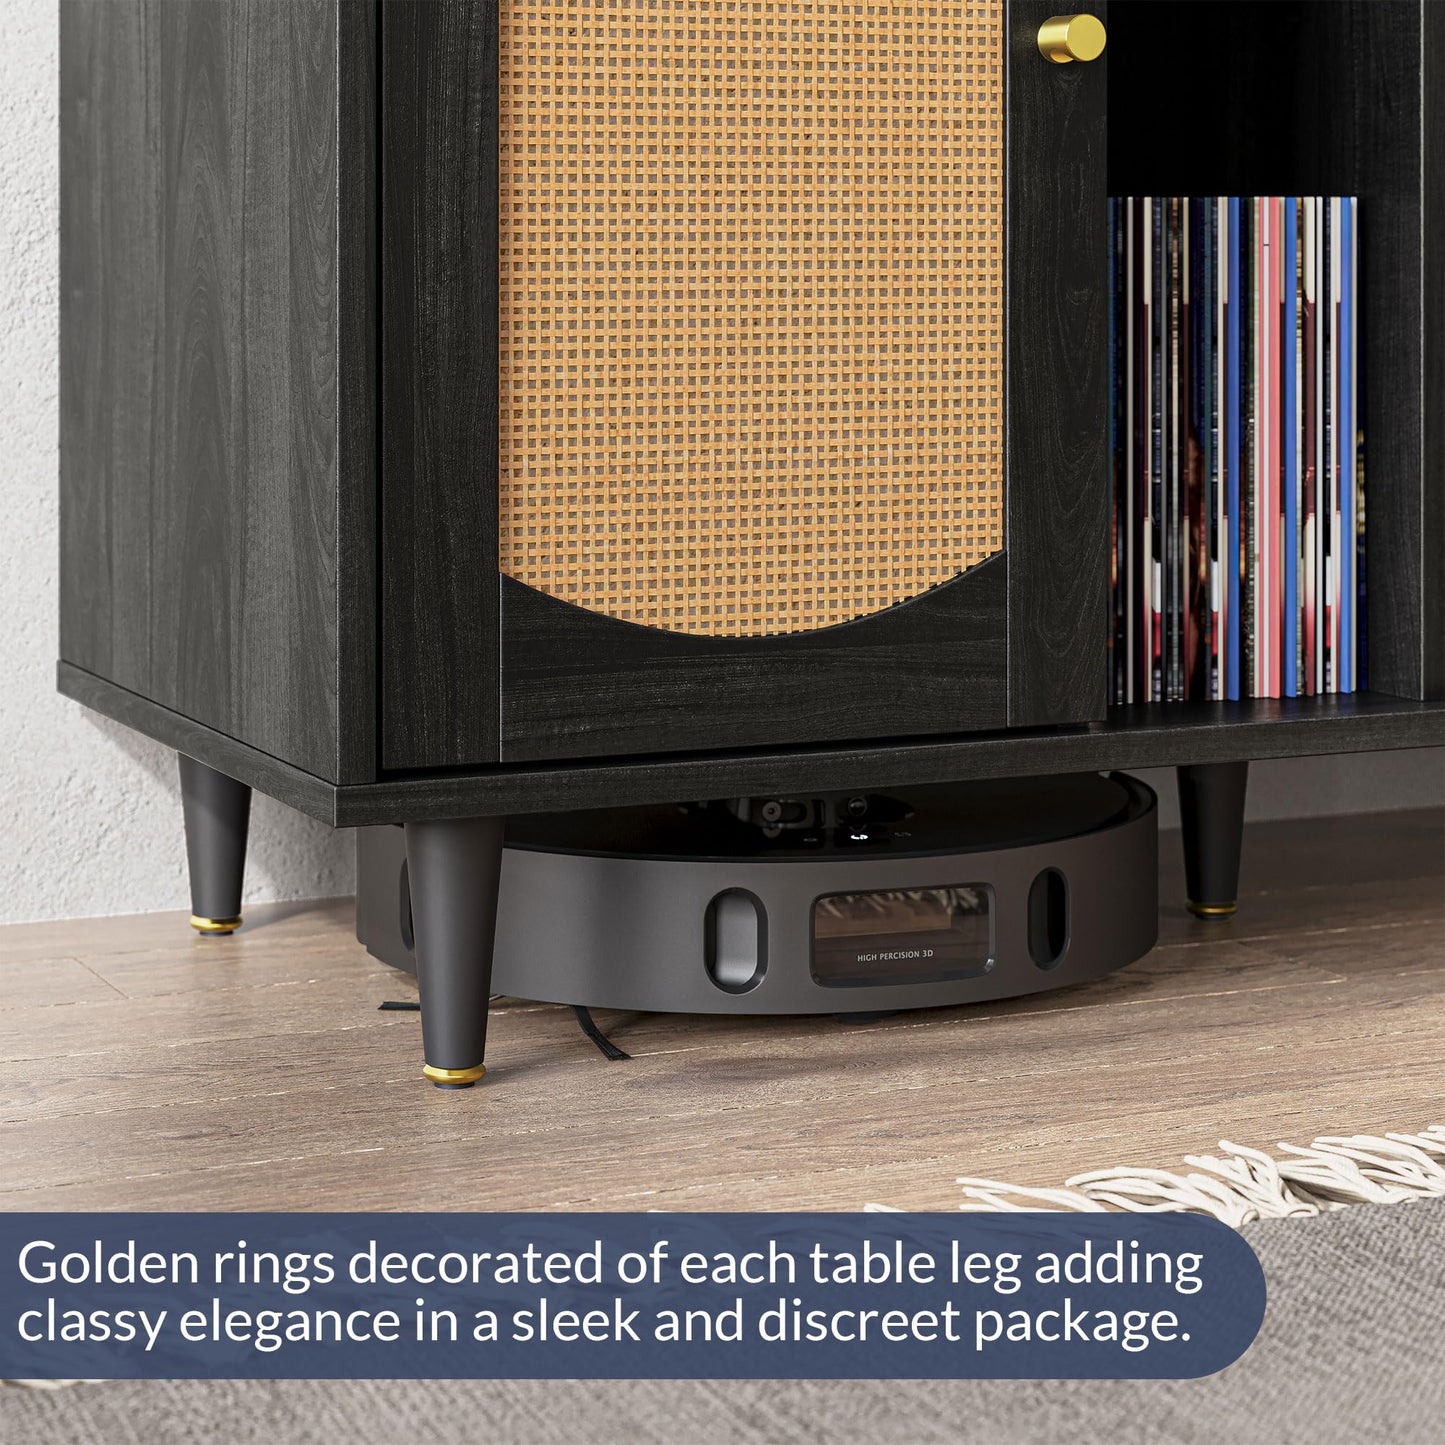 BELLEZE Mid-Century Record Player Stand, Vinyl Record Storage Cabinet Holds up to 350+ Albums, Rattern Decorated Turntable Stand with Power Outlet for Living Room, Bedroom and Office - Brown